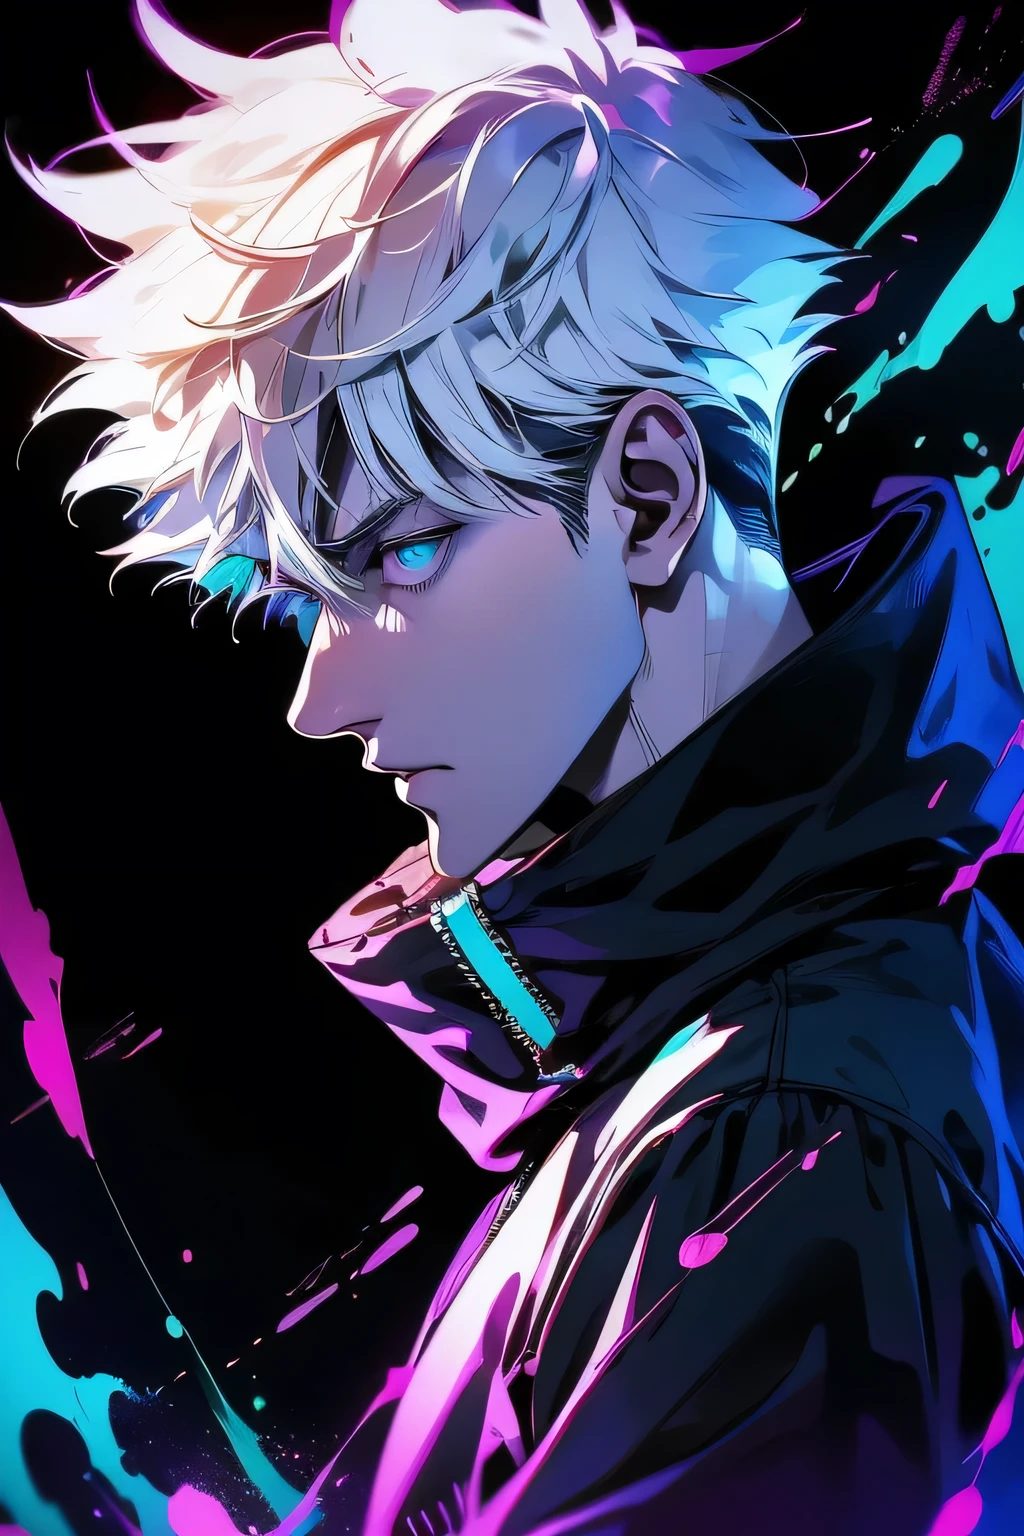 a man with white hair and a purple jacket holding a cell phone, cyberpunk art inspired by Munakata Shikō, tumblr, digital art, ufotable art style, anime wallaper, profile picture 1024px, trigger anime artstyle, badass anime 8 k, tokyo ghoul, 4k anime wallpaper, jujutsu kaisen